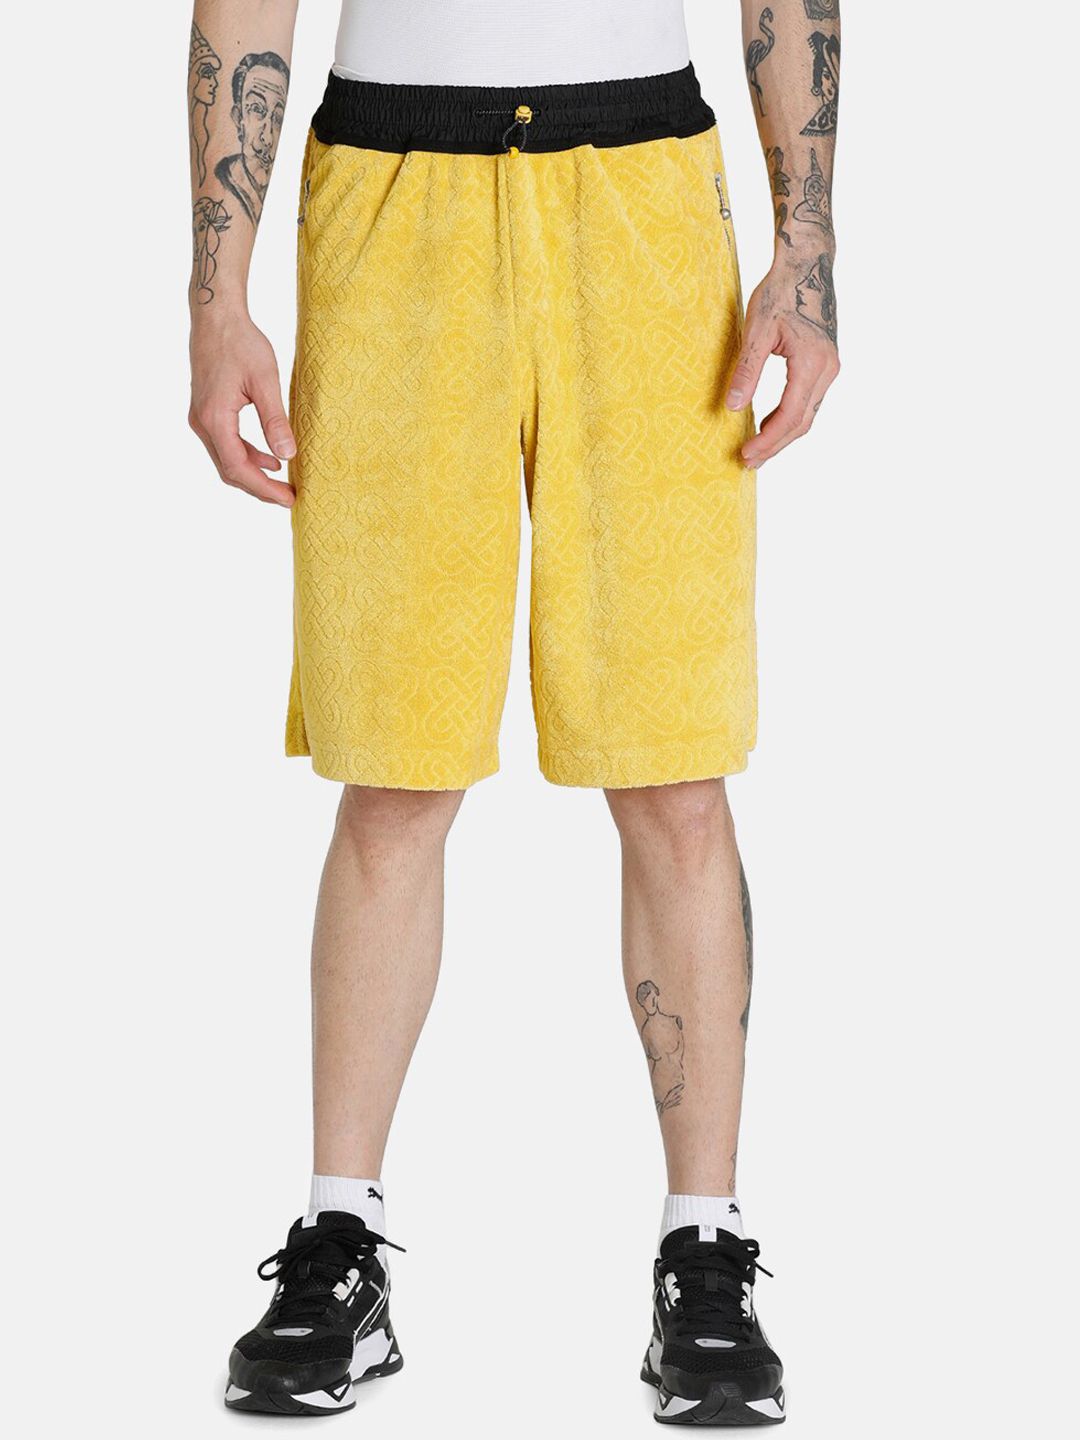 Puma Unisex Yellow Loose Fit PUMA x PRONOUNCE T LG Running Sports Sustainable Shorts Price in India